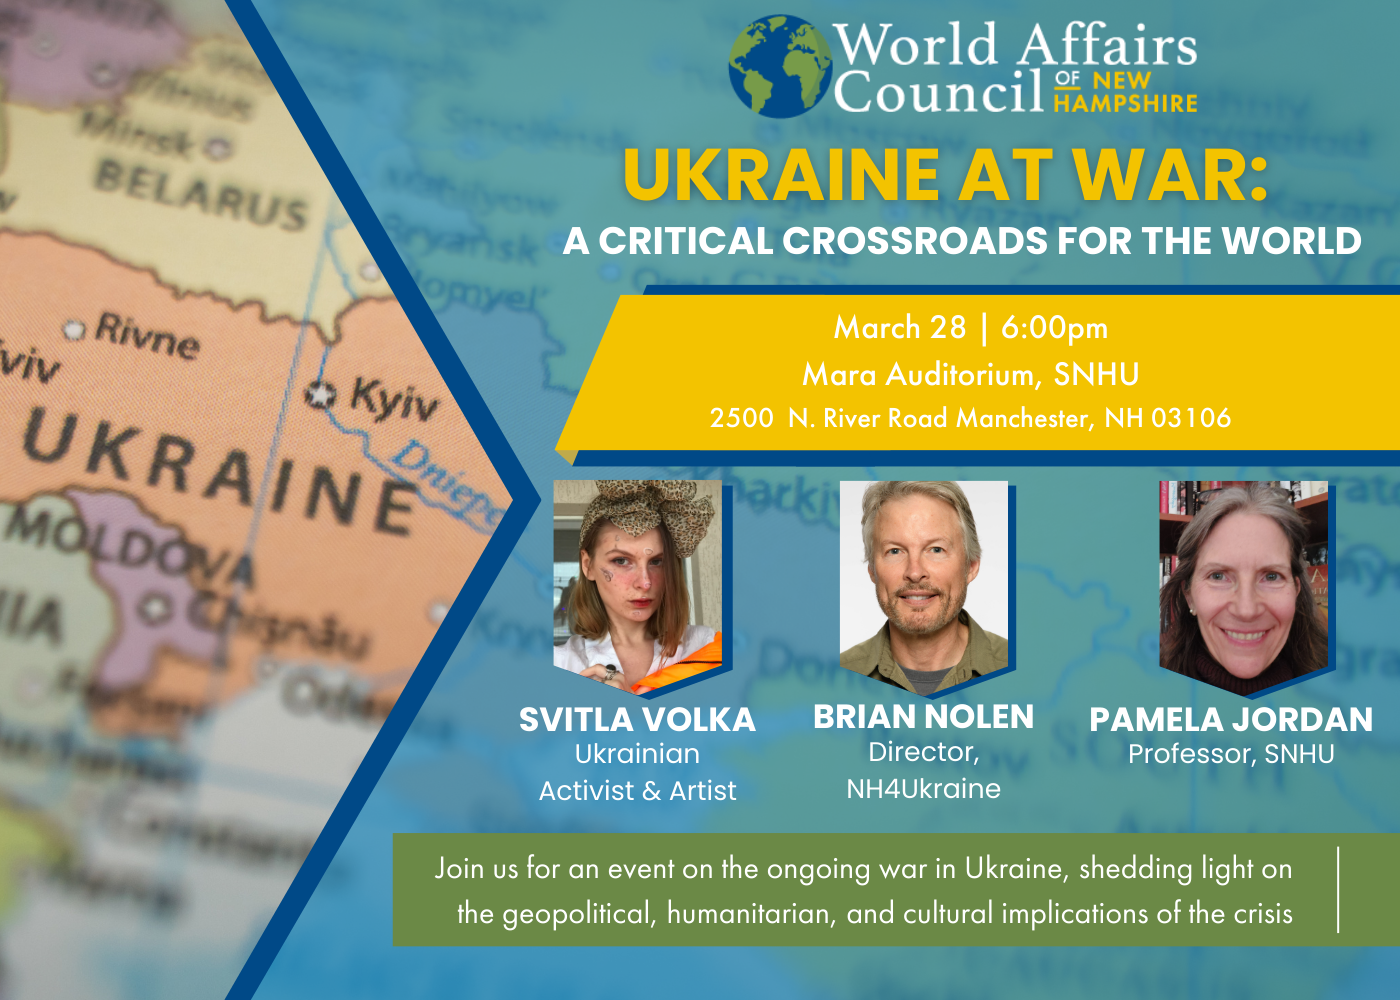 Ukraine at War: A Critical Crossroads for the World March 28th